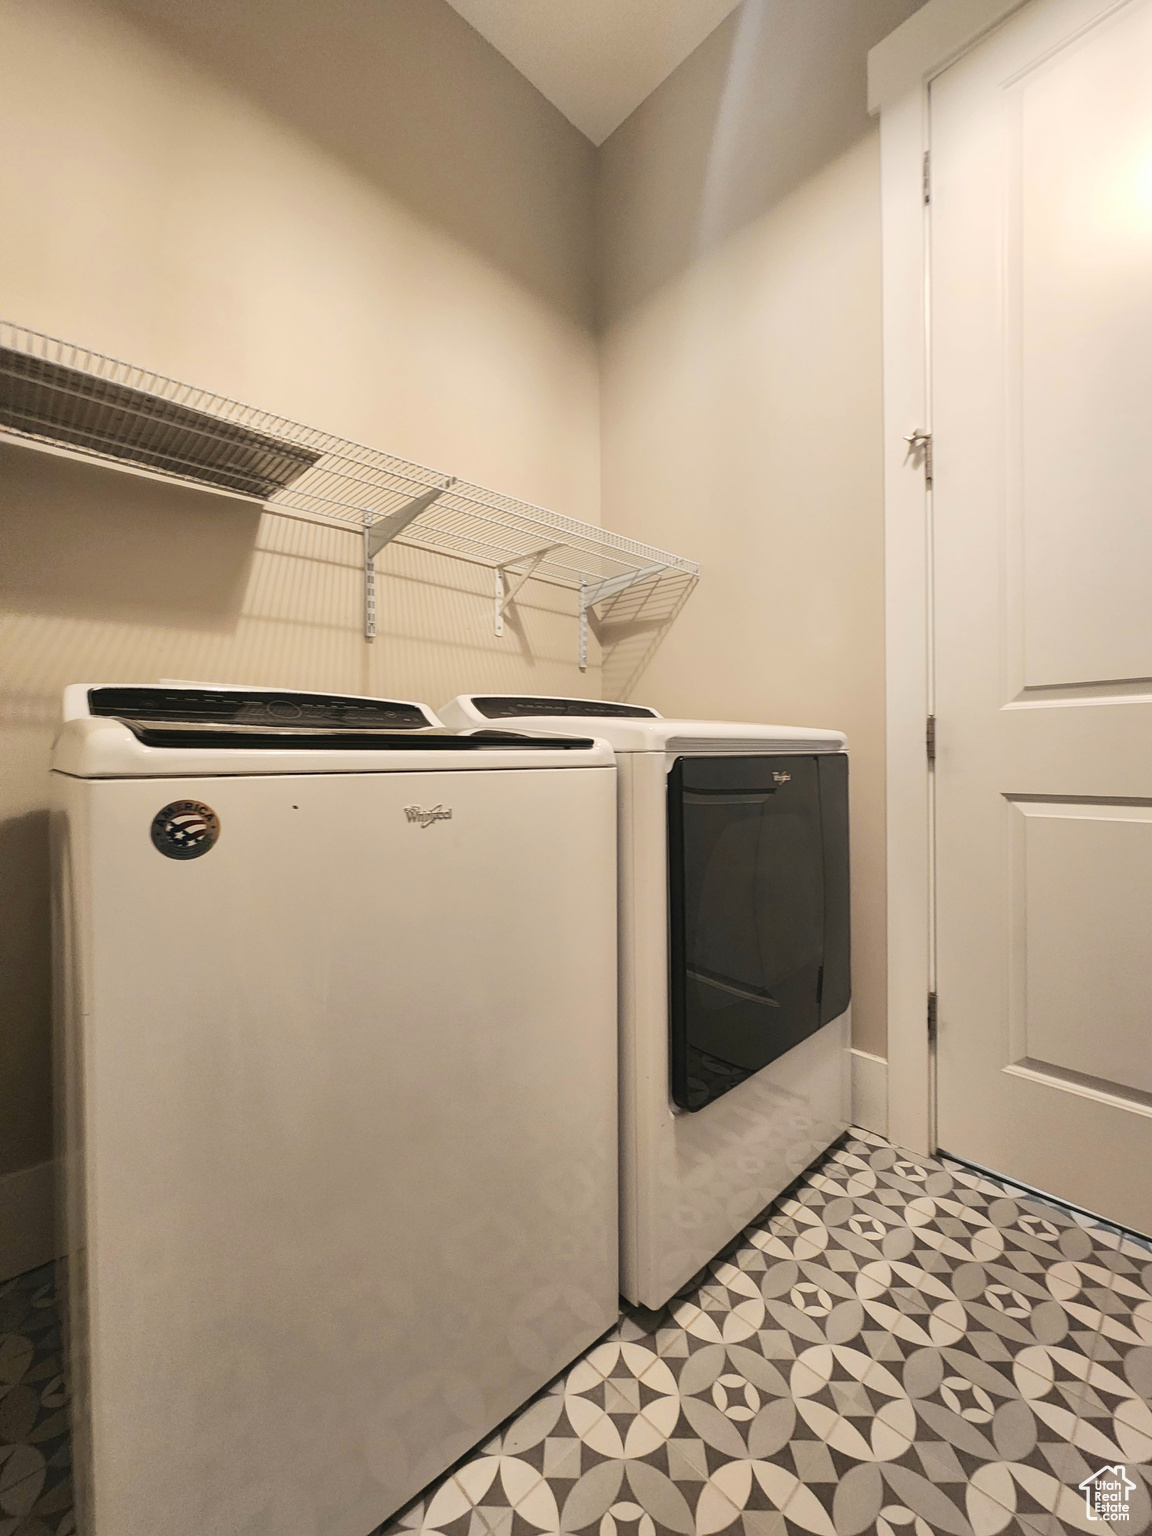 Laundry room with light tile flooring and washer and dryer